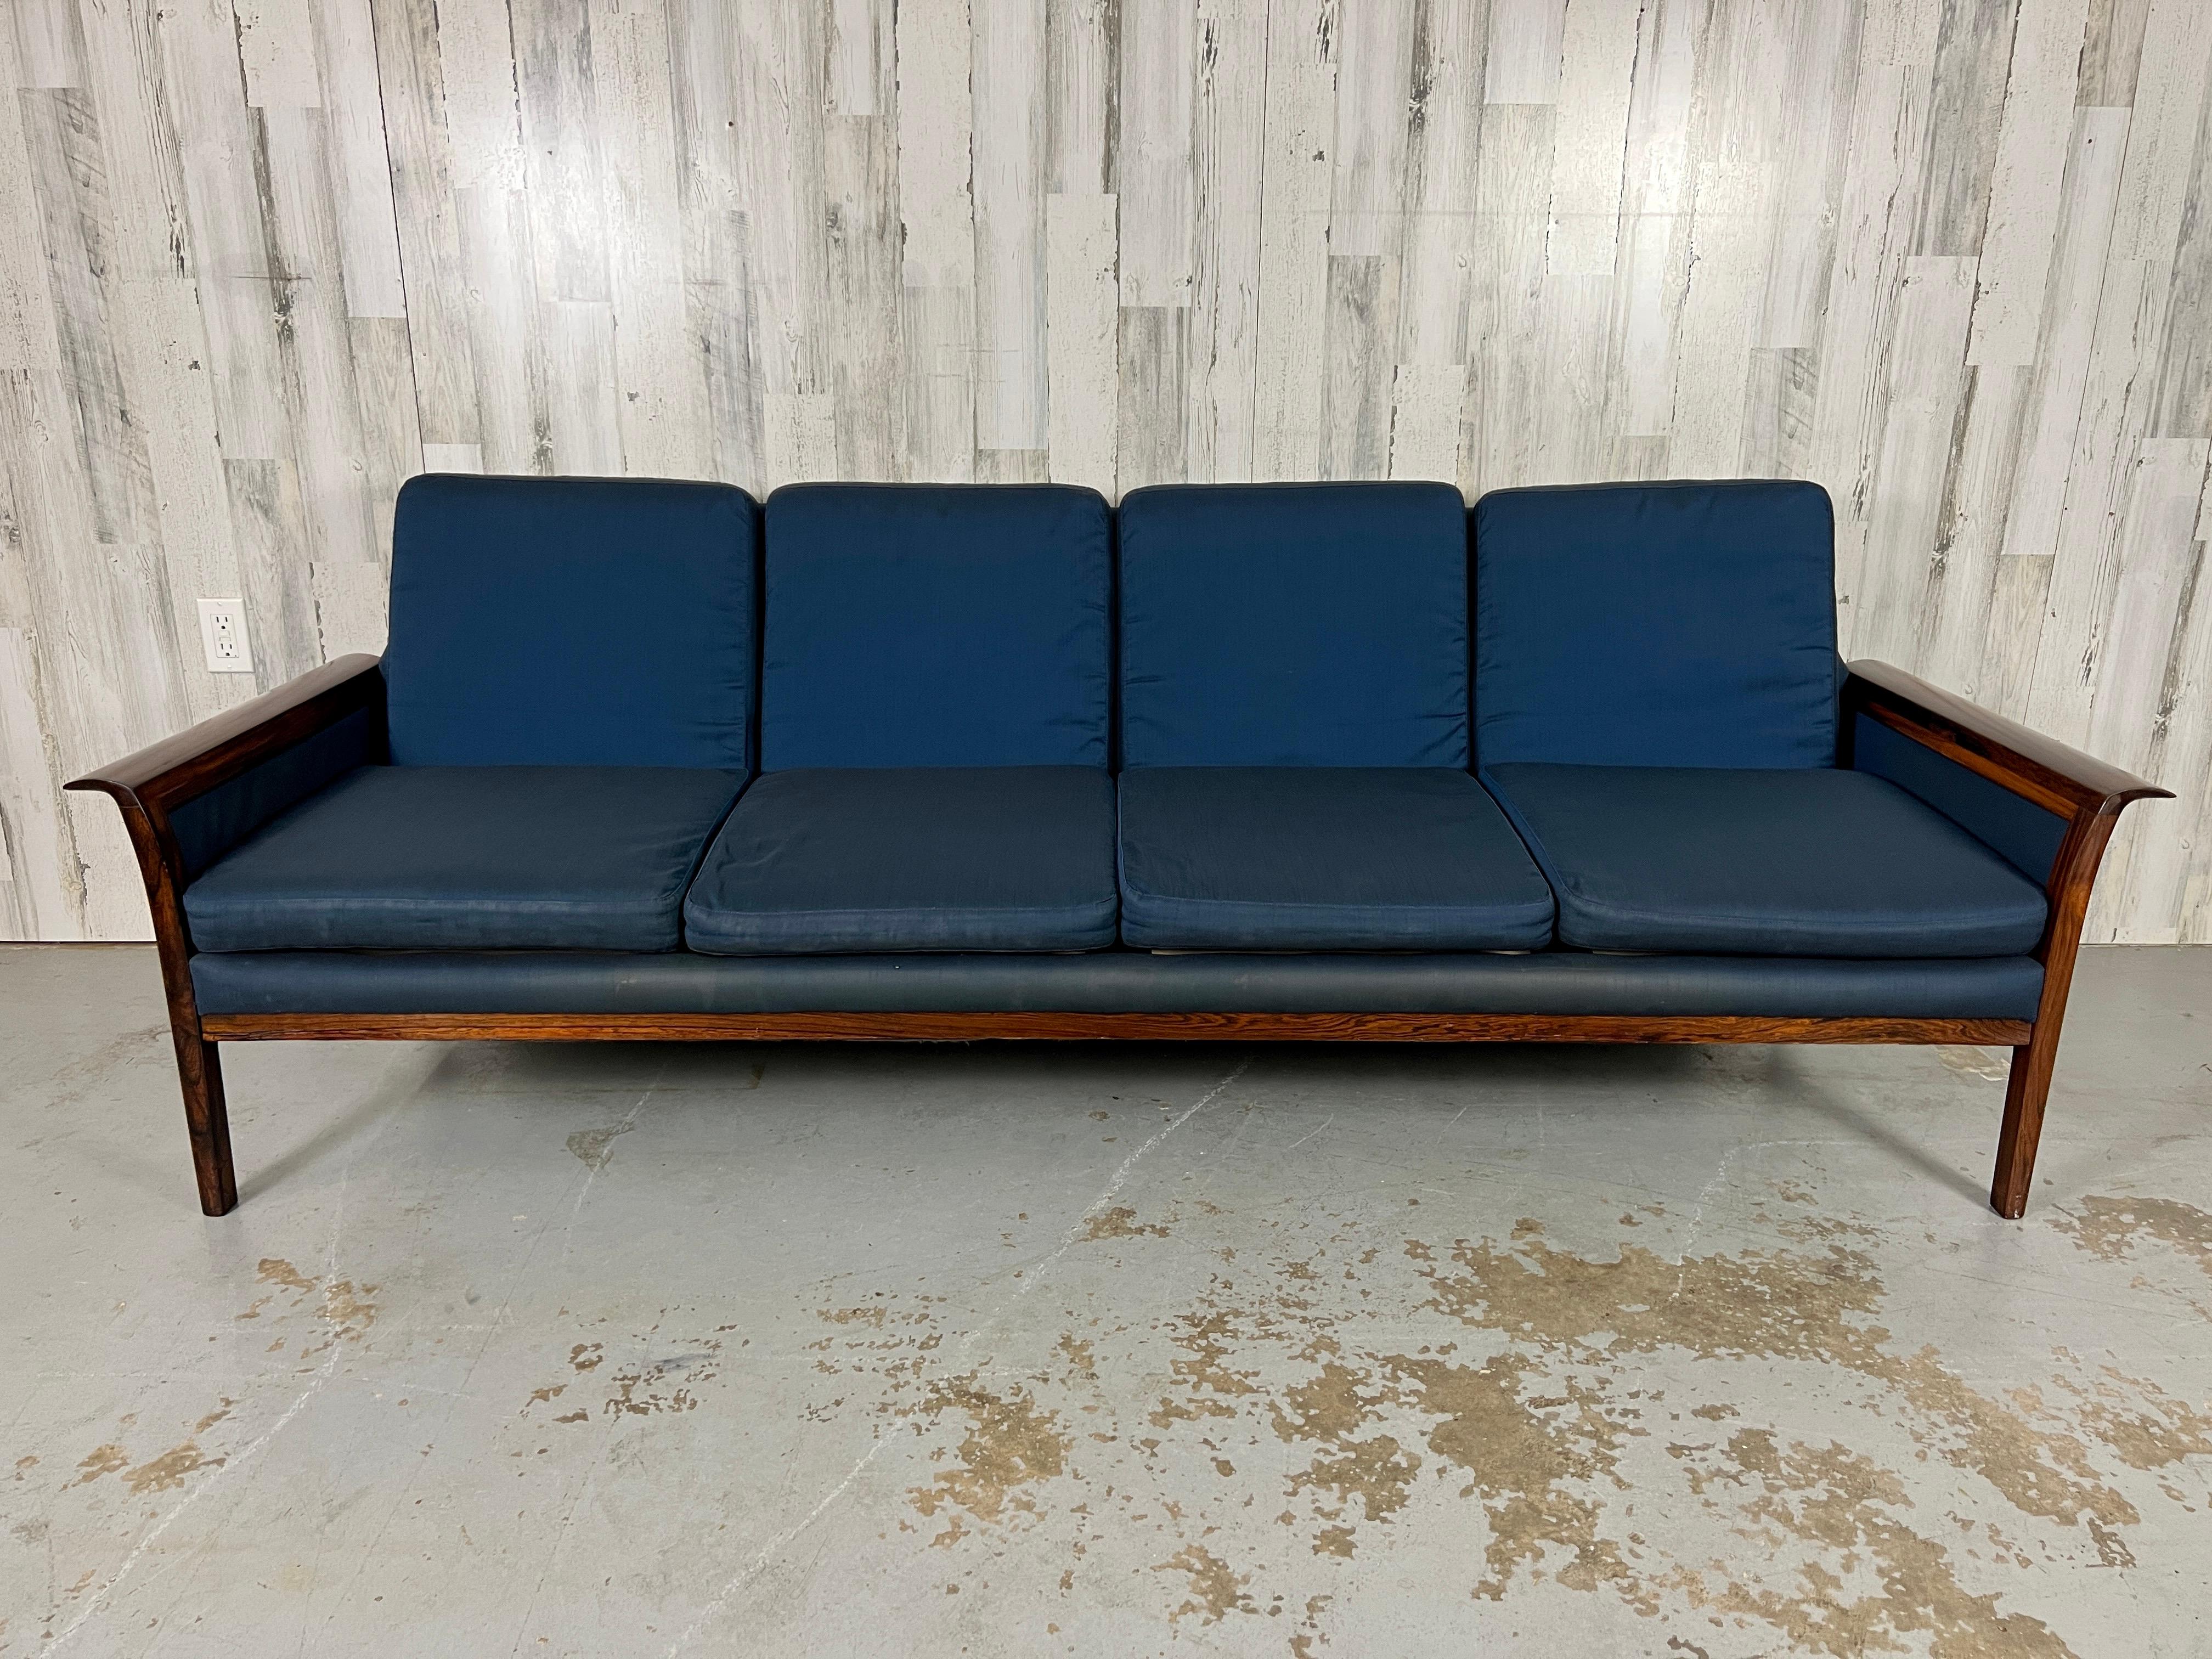 Brazilian rosewood Hans Olsen 4 seater sofa for Vatne Mobler. The cushions are reversible one side has a pattern the other is plain. Please see pictures.